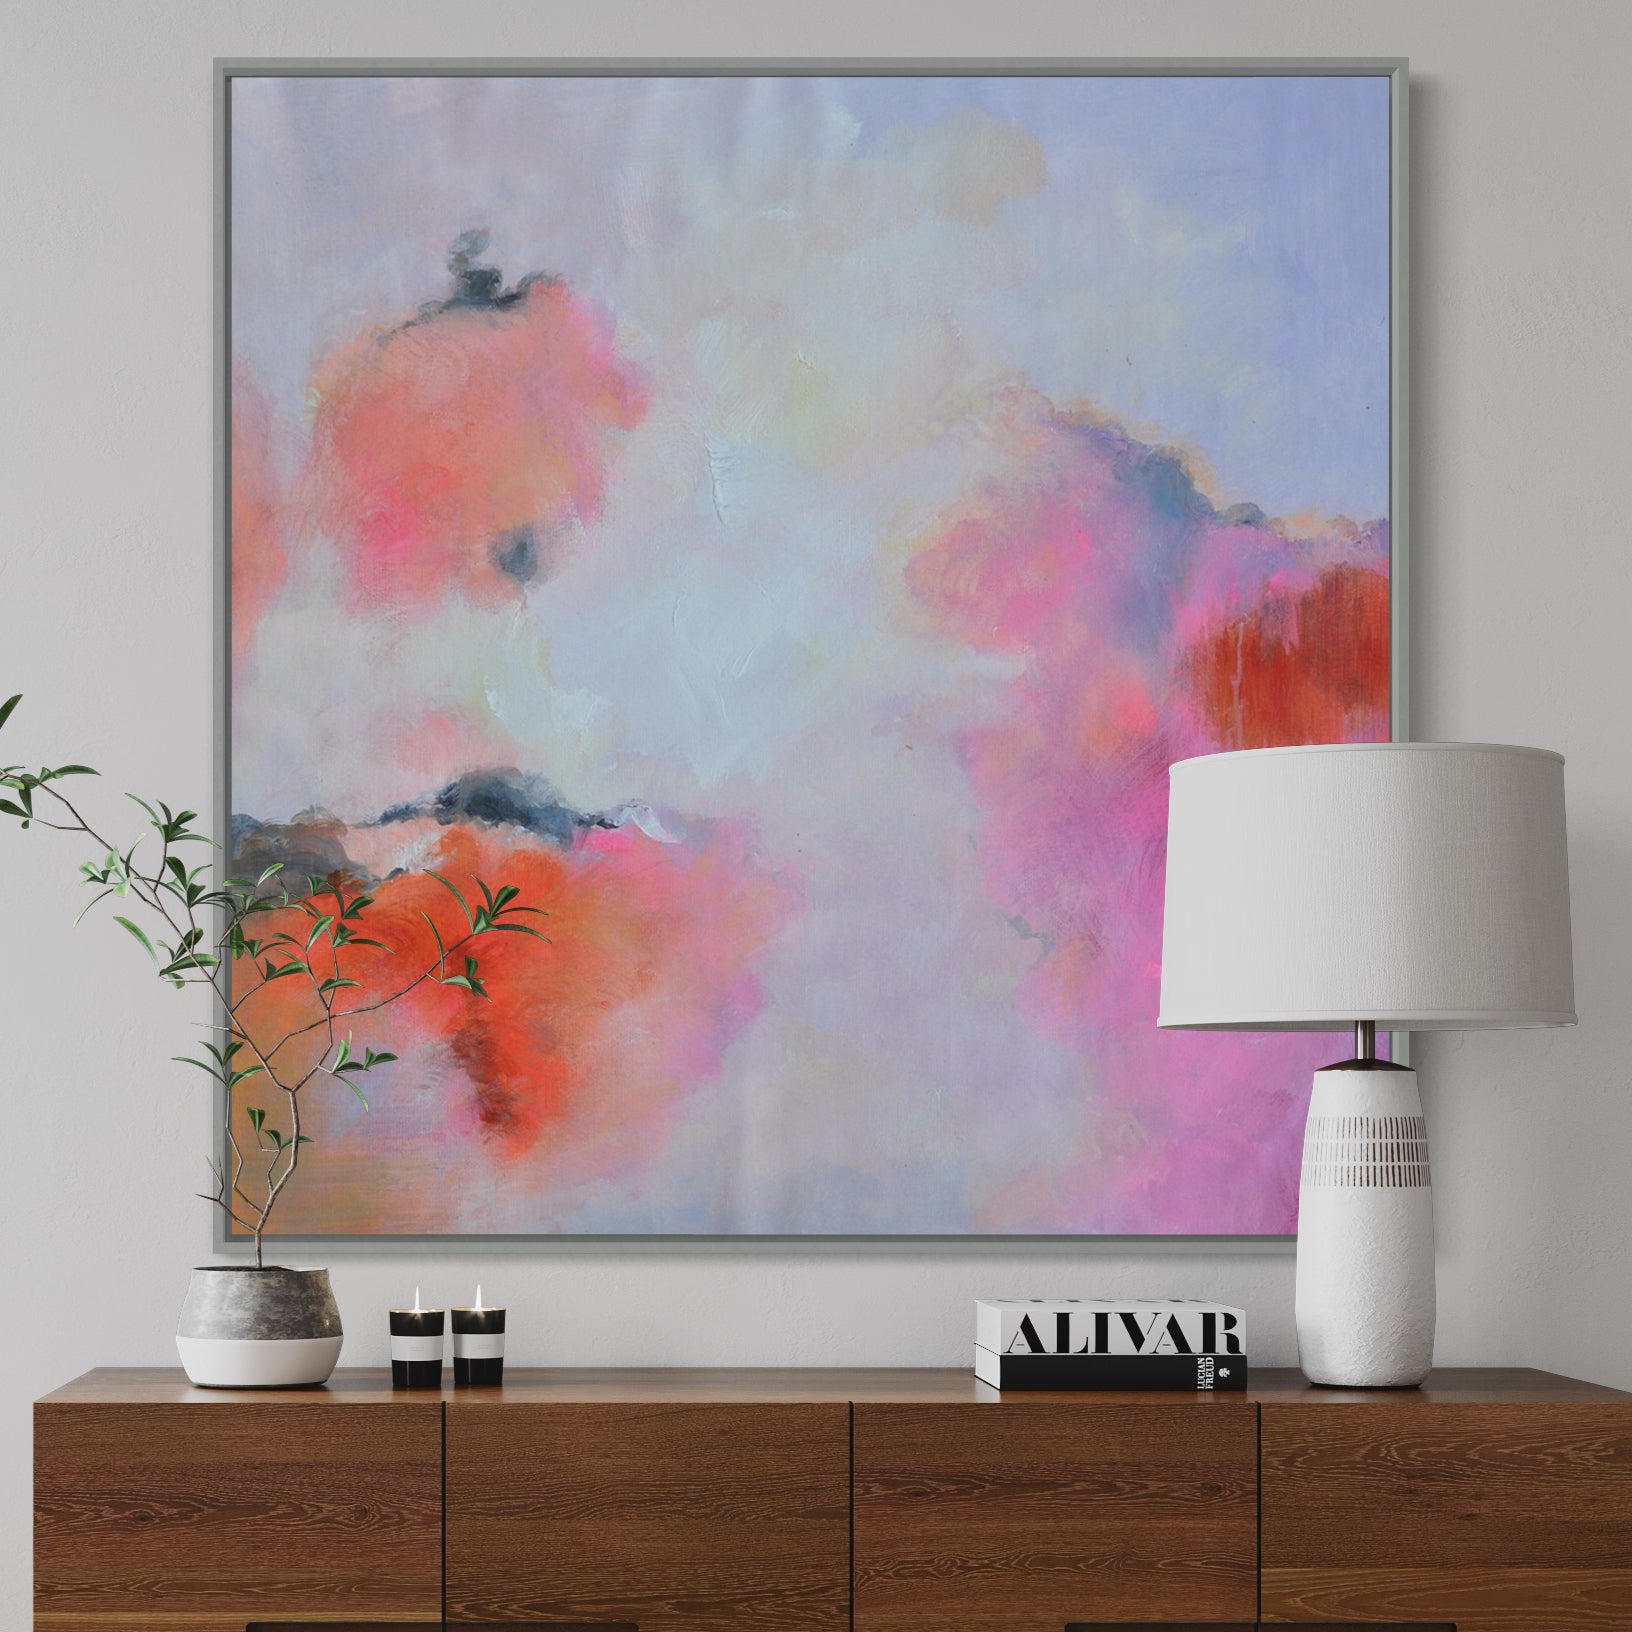 Cotton Candy, Black And Golden / 80x80cm